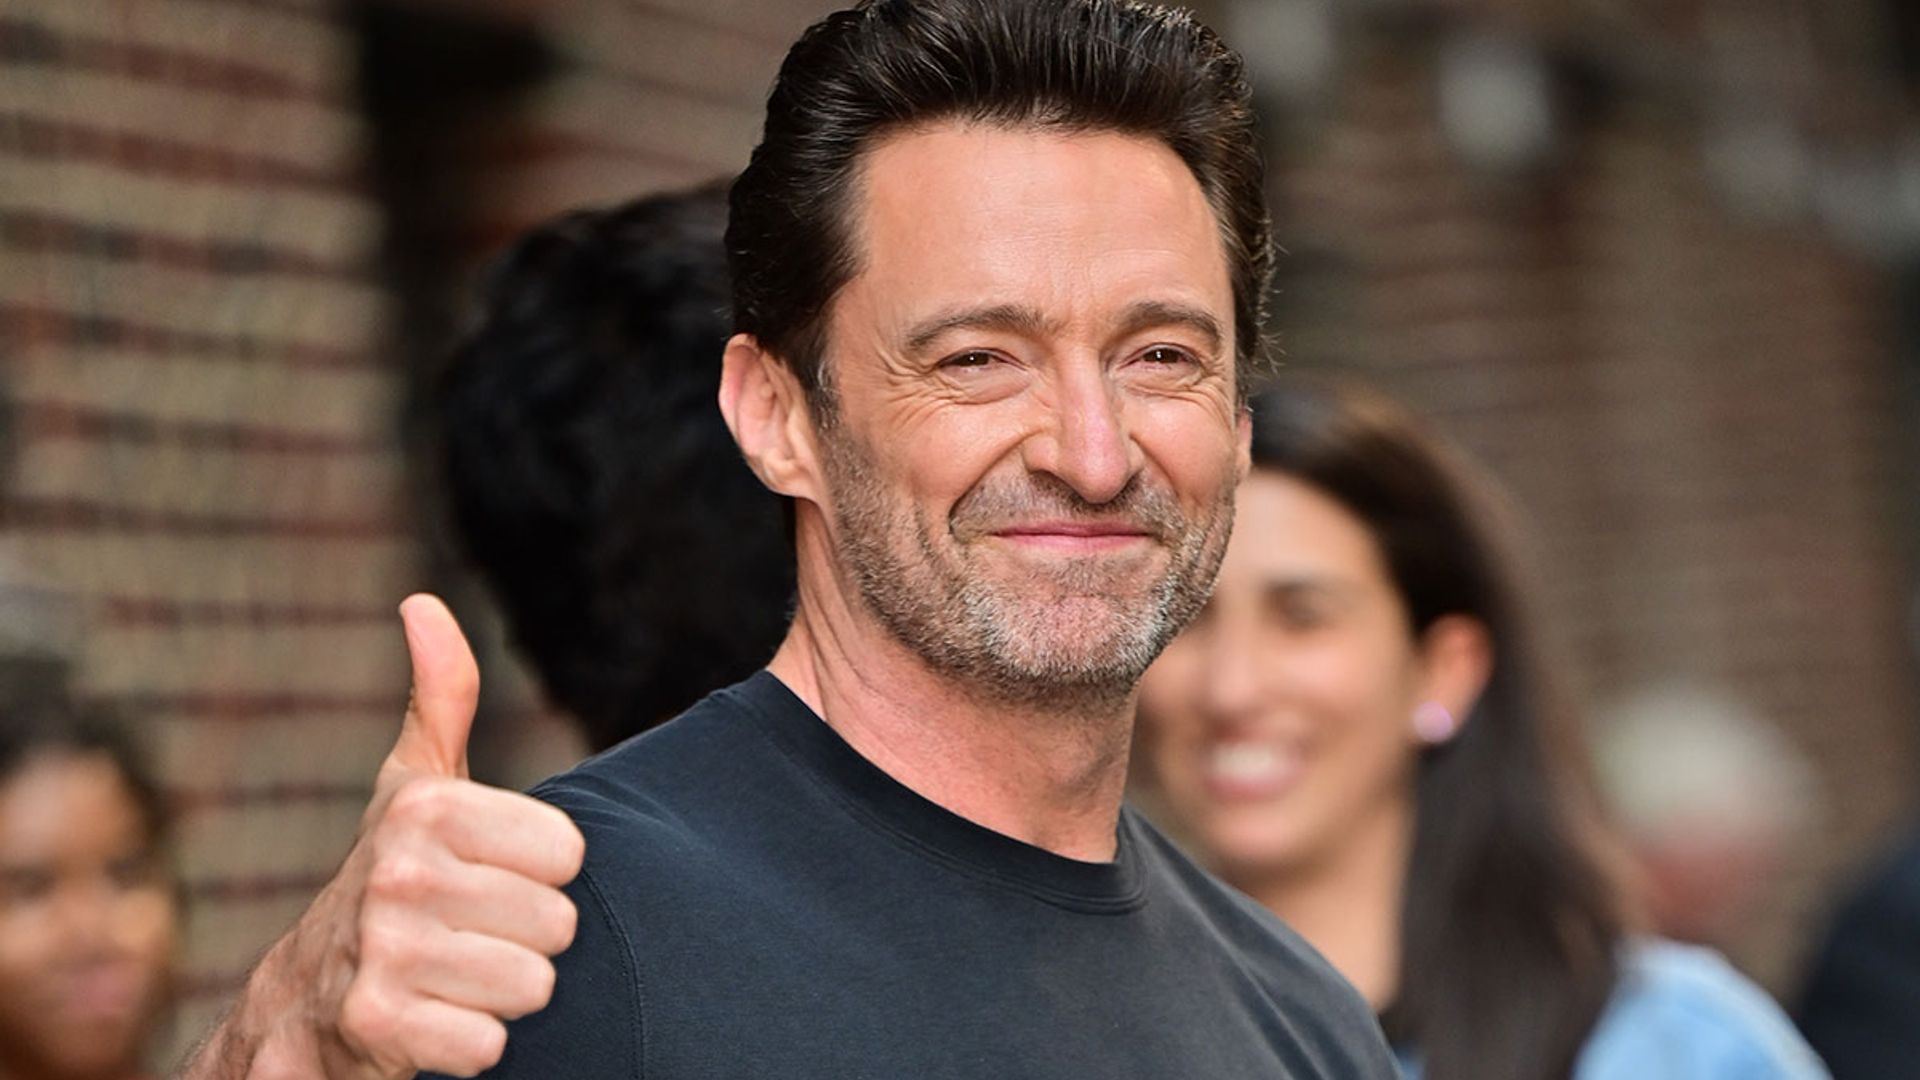 Hugh Jackman's unexpected baby photo has fans pointing out uncanny resemblance to Hollywood star